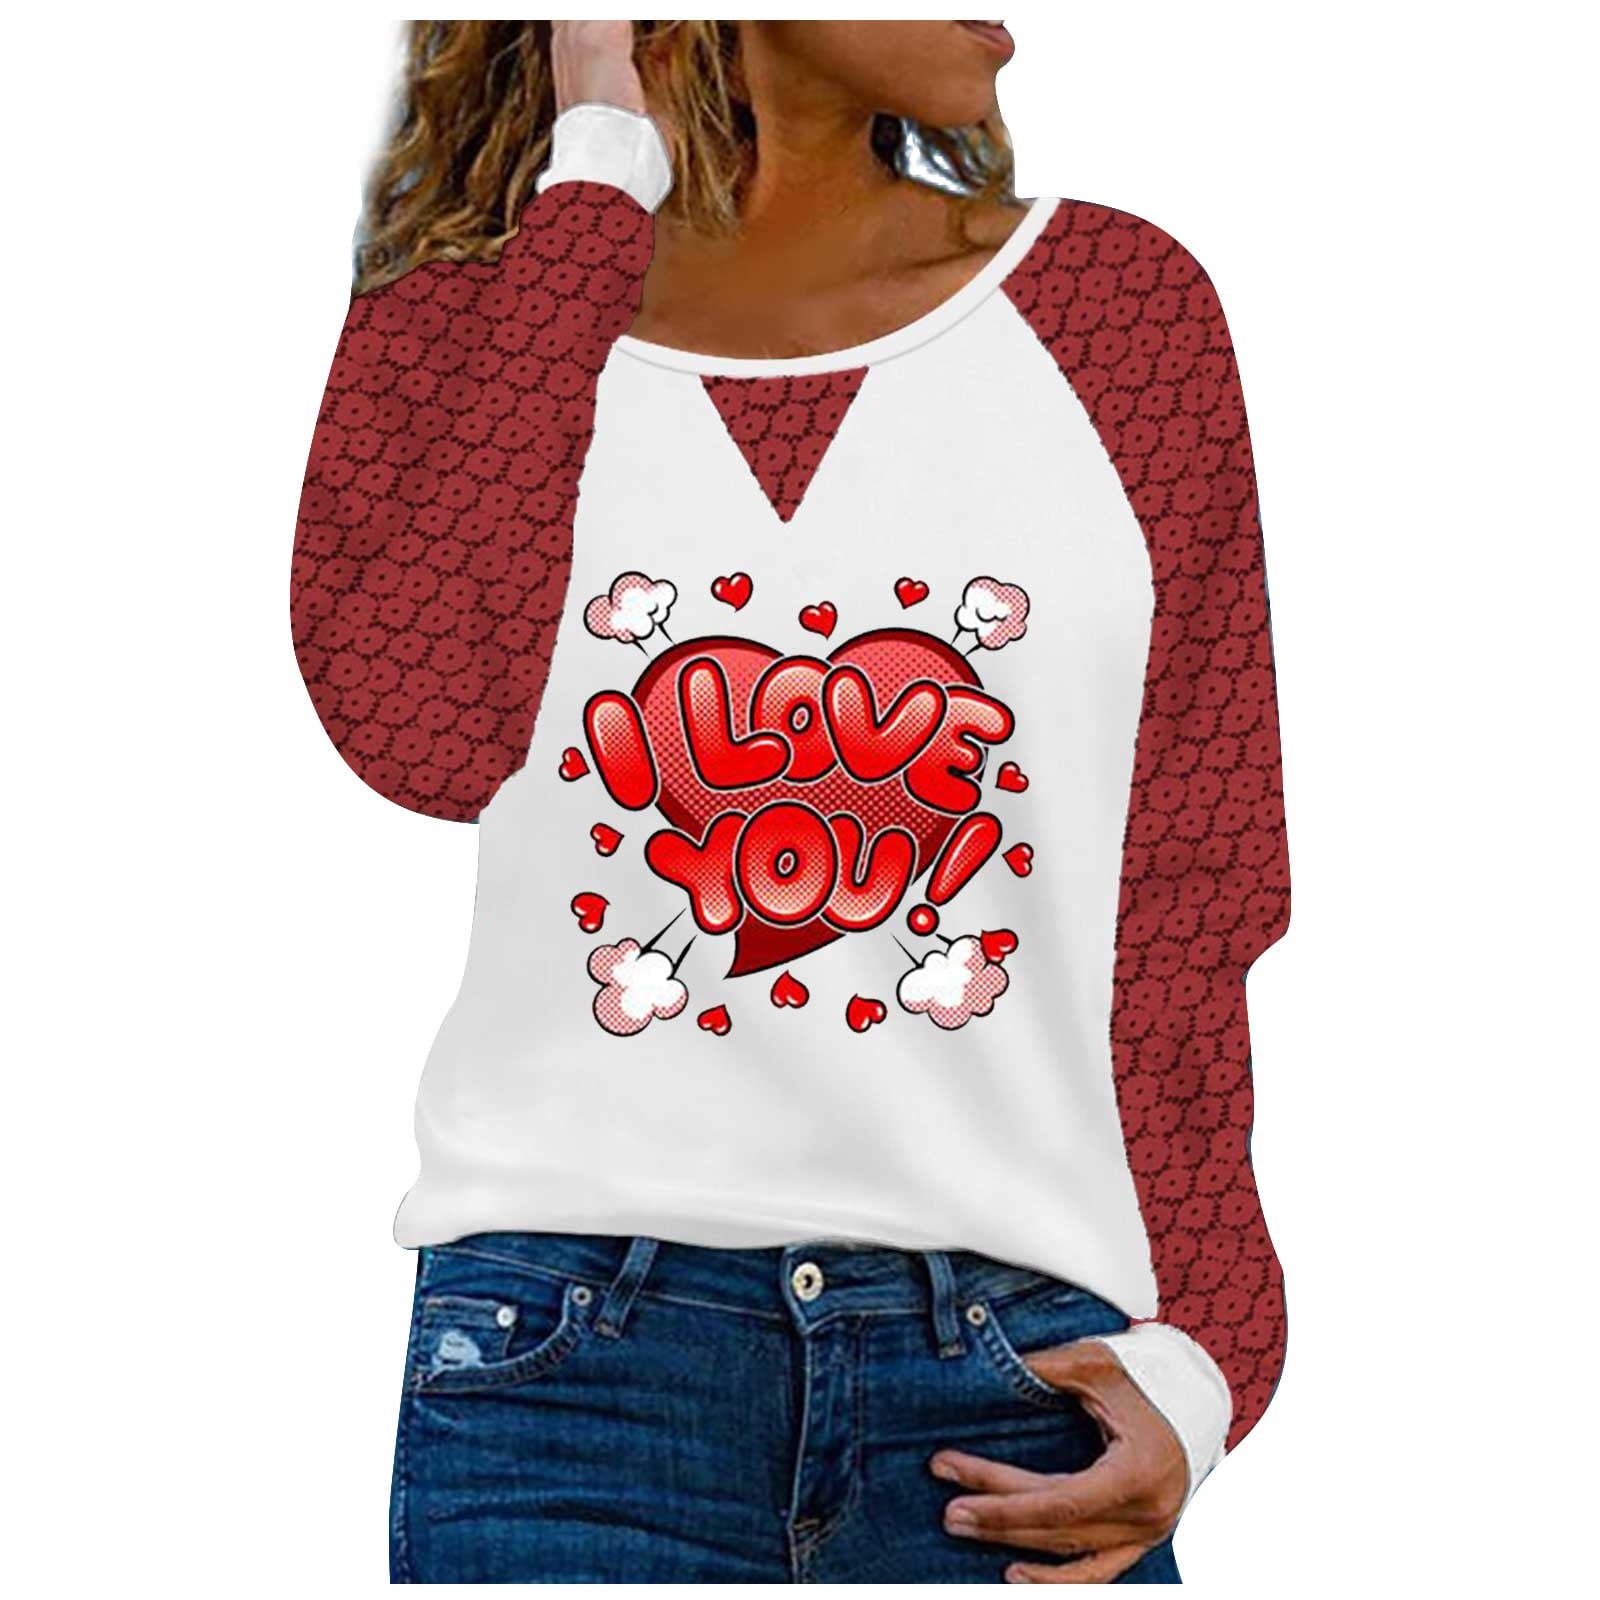 Amtdh Womens Tops Valentine's Day Print Y2K Clothes Raglan Tee Shirts Gifts  for Girlfriends Casual Sweatshirts Crewneck Long Sleeve Shirts for Women  Oversized Tops for Girls Red XL 